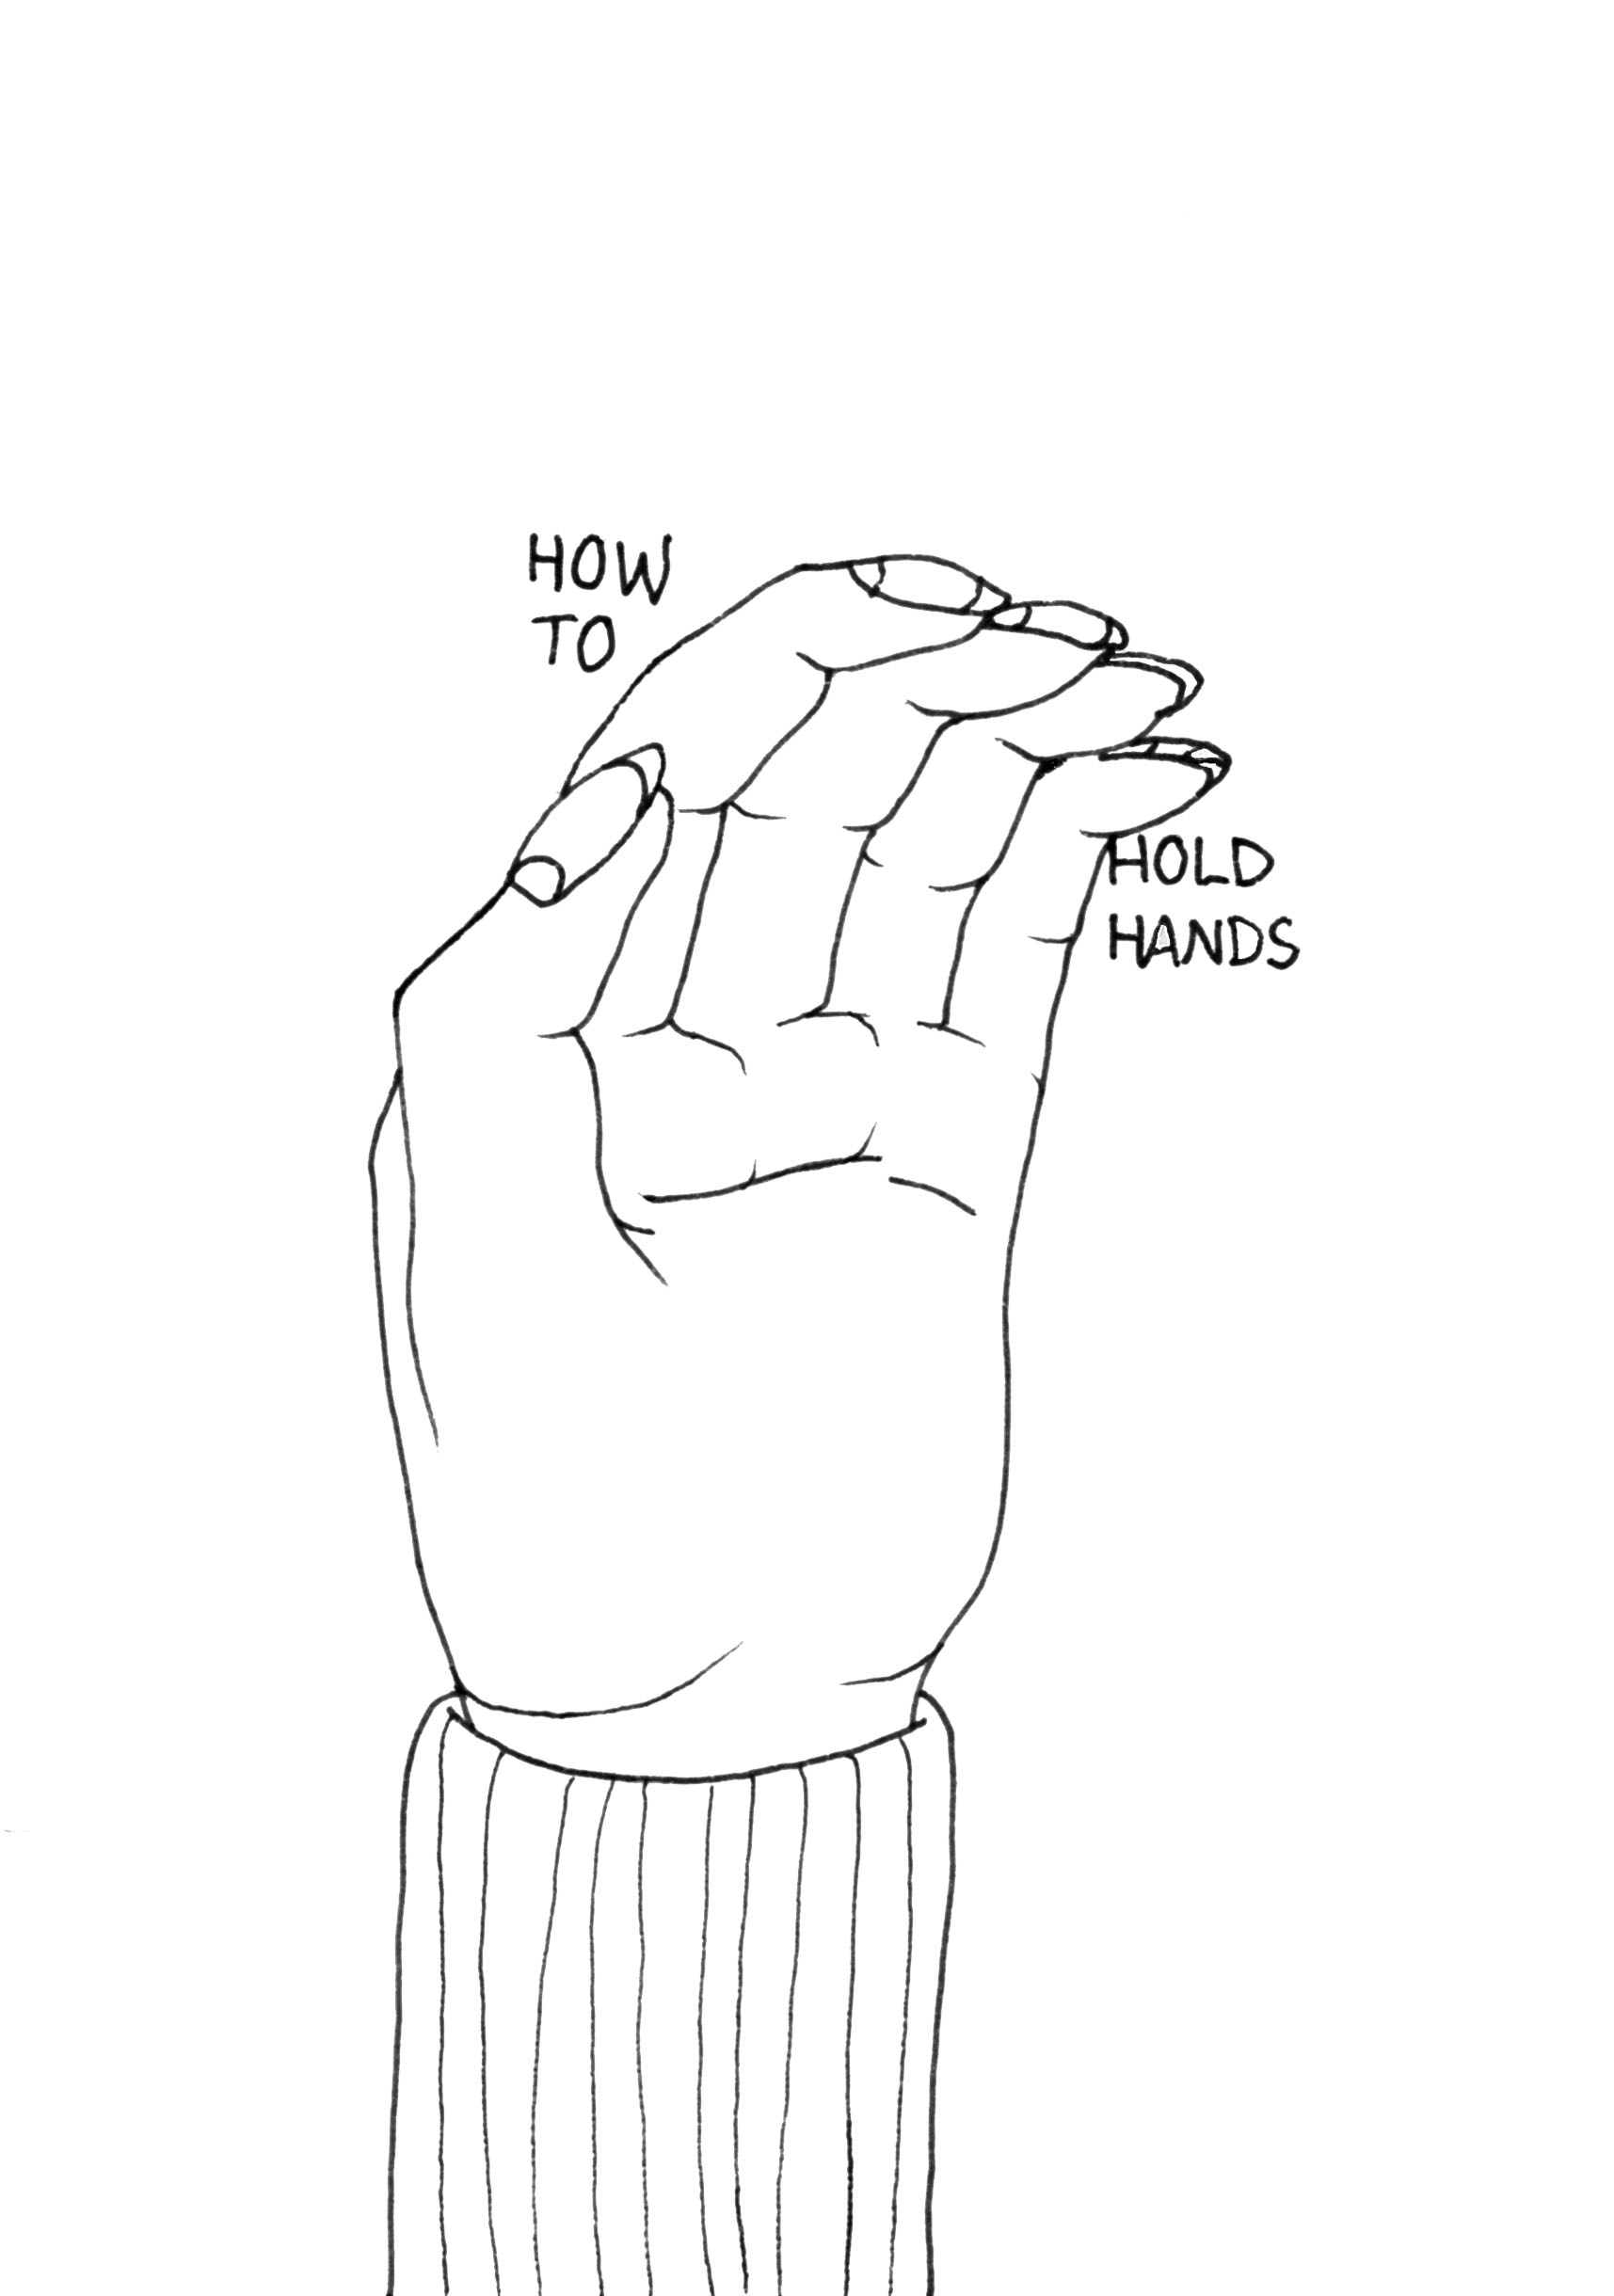 How to hold hands 1.jpeg